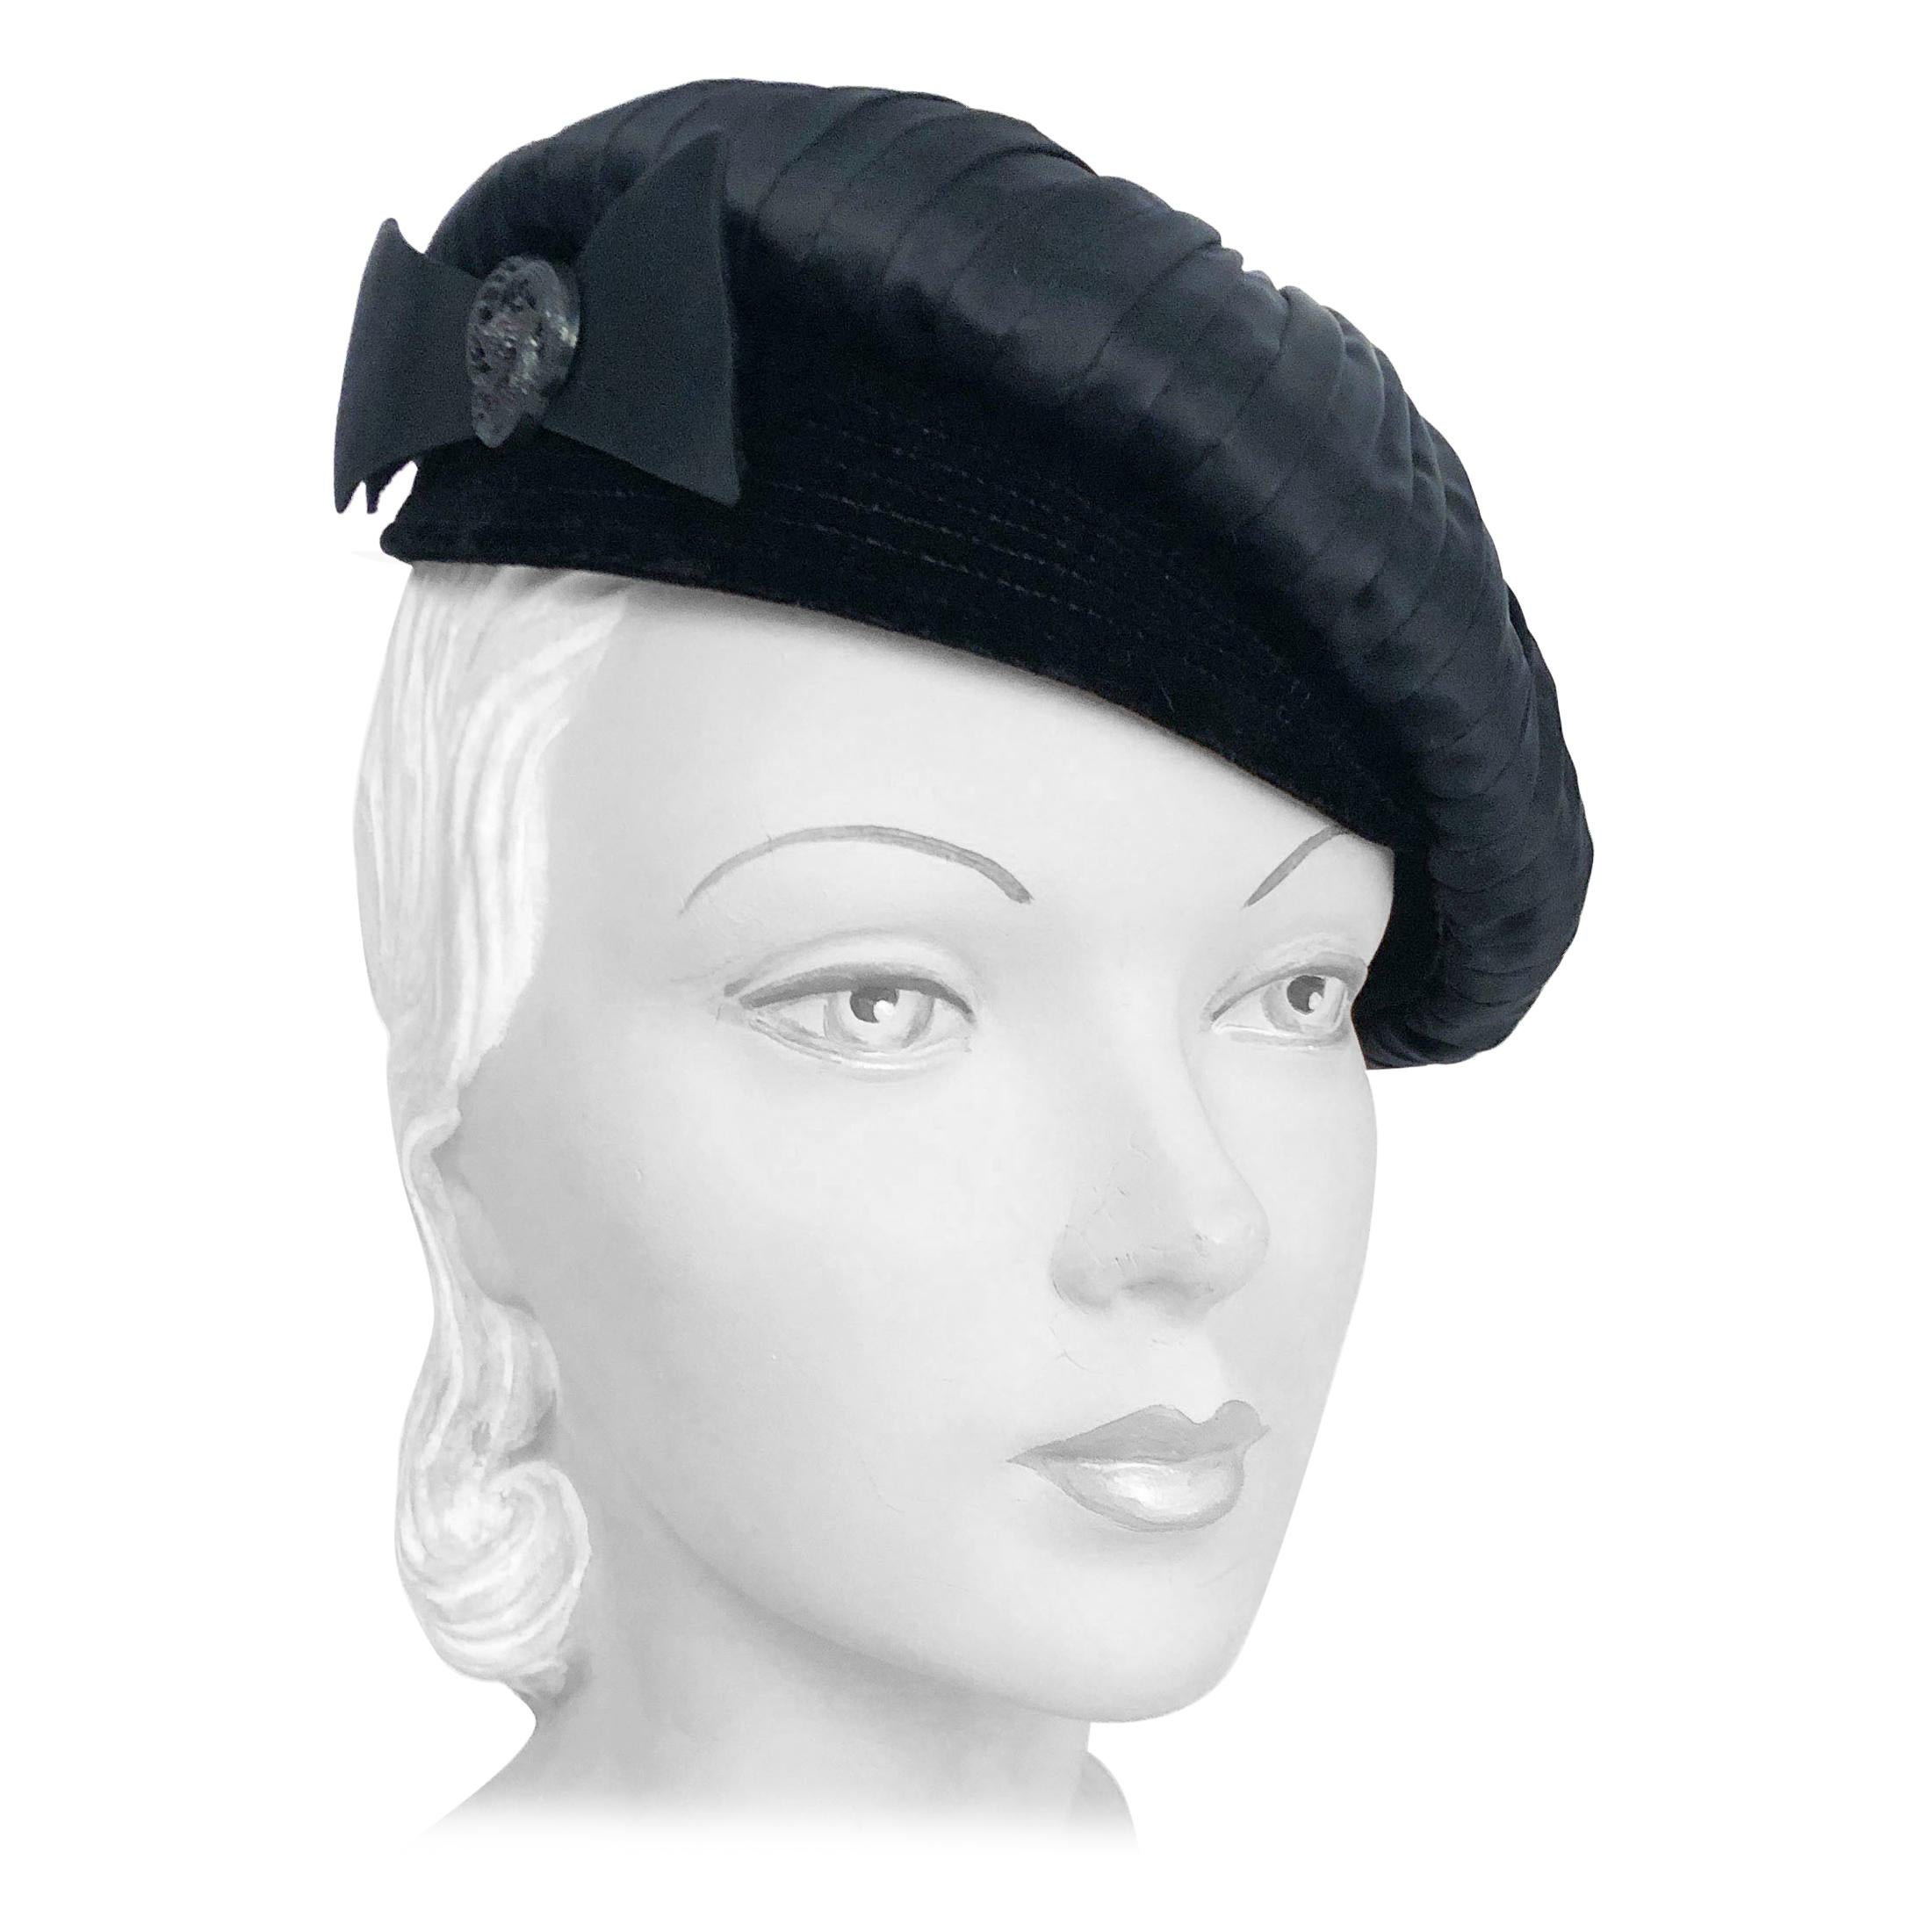 1950s Bonwit Teller Black Cap/Tam with Gathered Accents and Bow